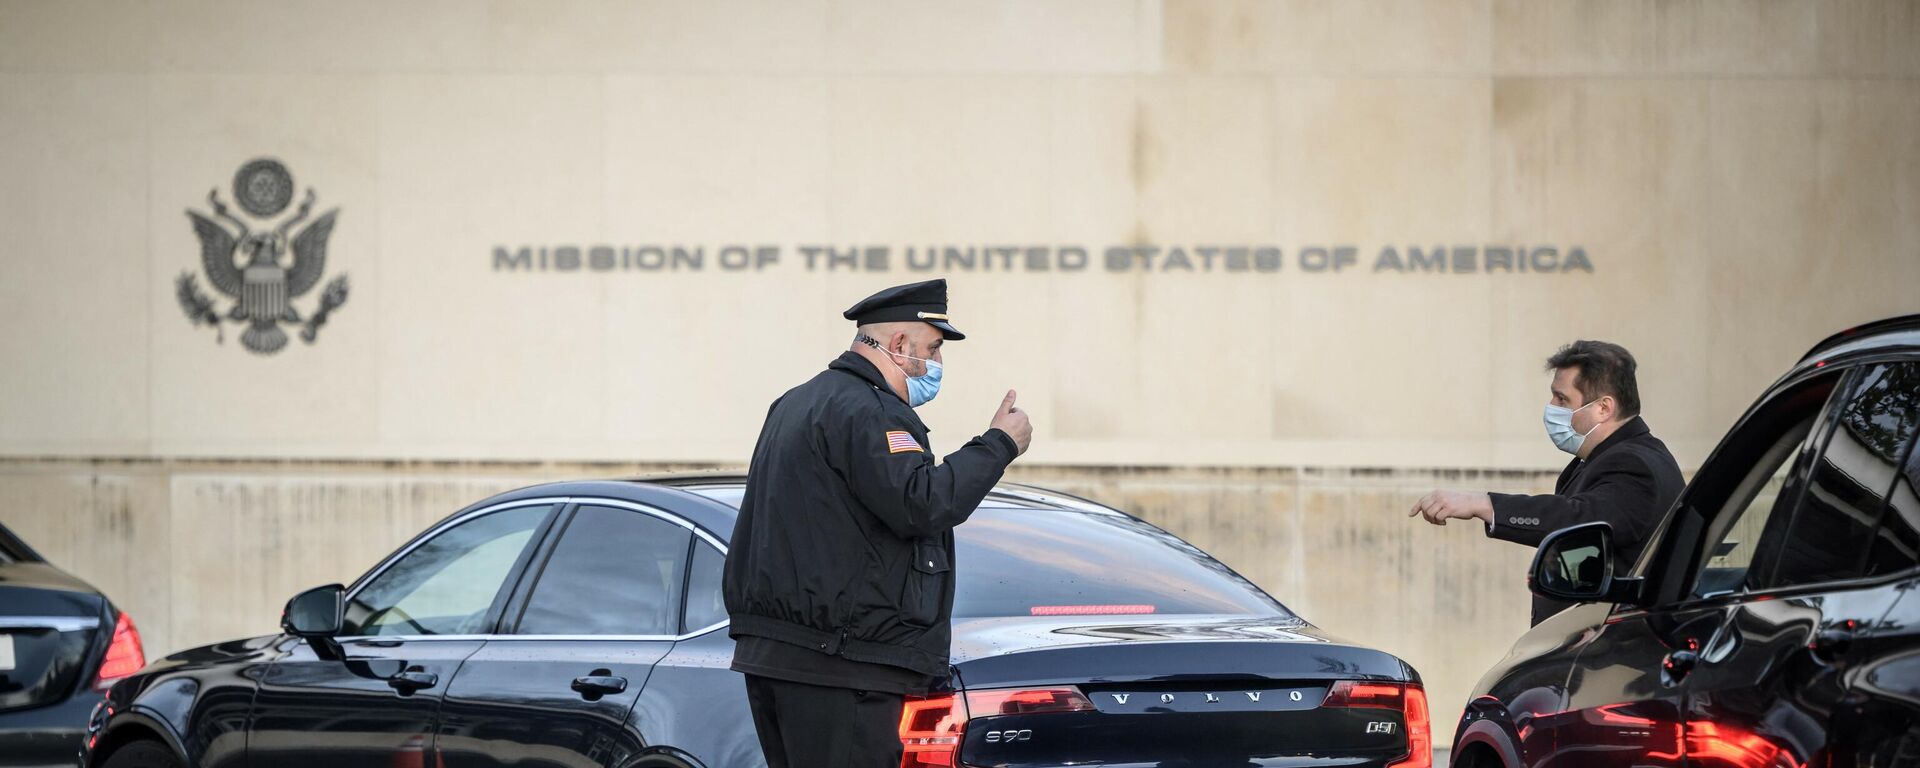 A US guard gives a thumb up to an official as Russian convoy arrives to the US permanent Mission during talks in Geneva on soaring tensions over Ukraine, in Geneva, on January 10, 2022. - Sputnik International, 1920, 10.01.2022